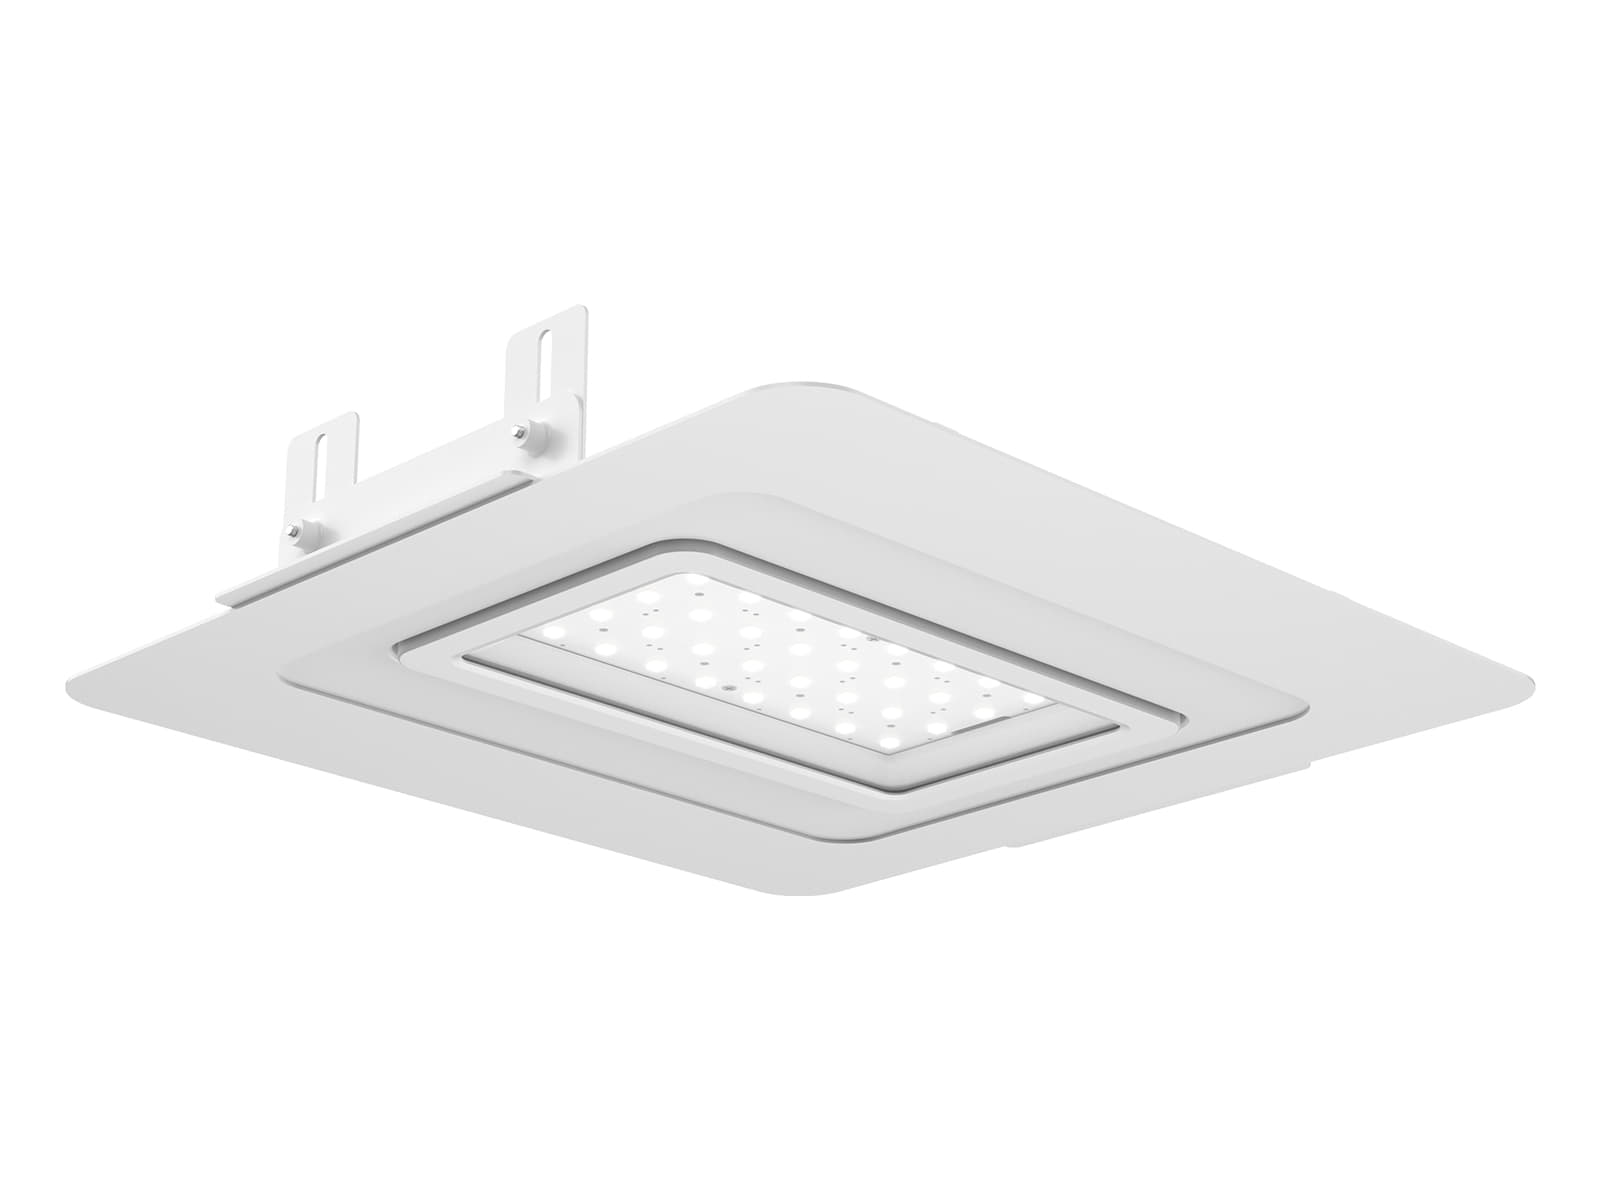 ST42 Canopy Light Recessed Mount